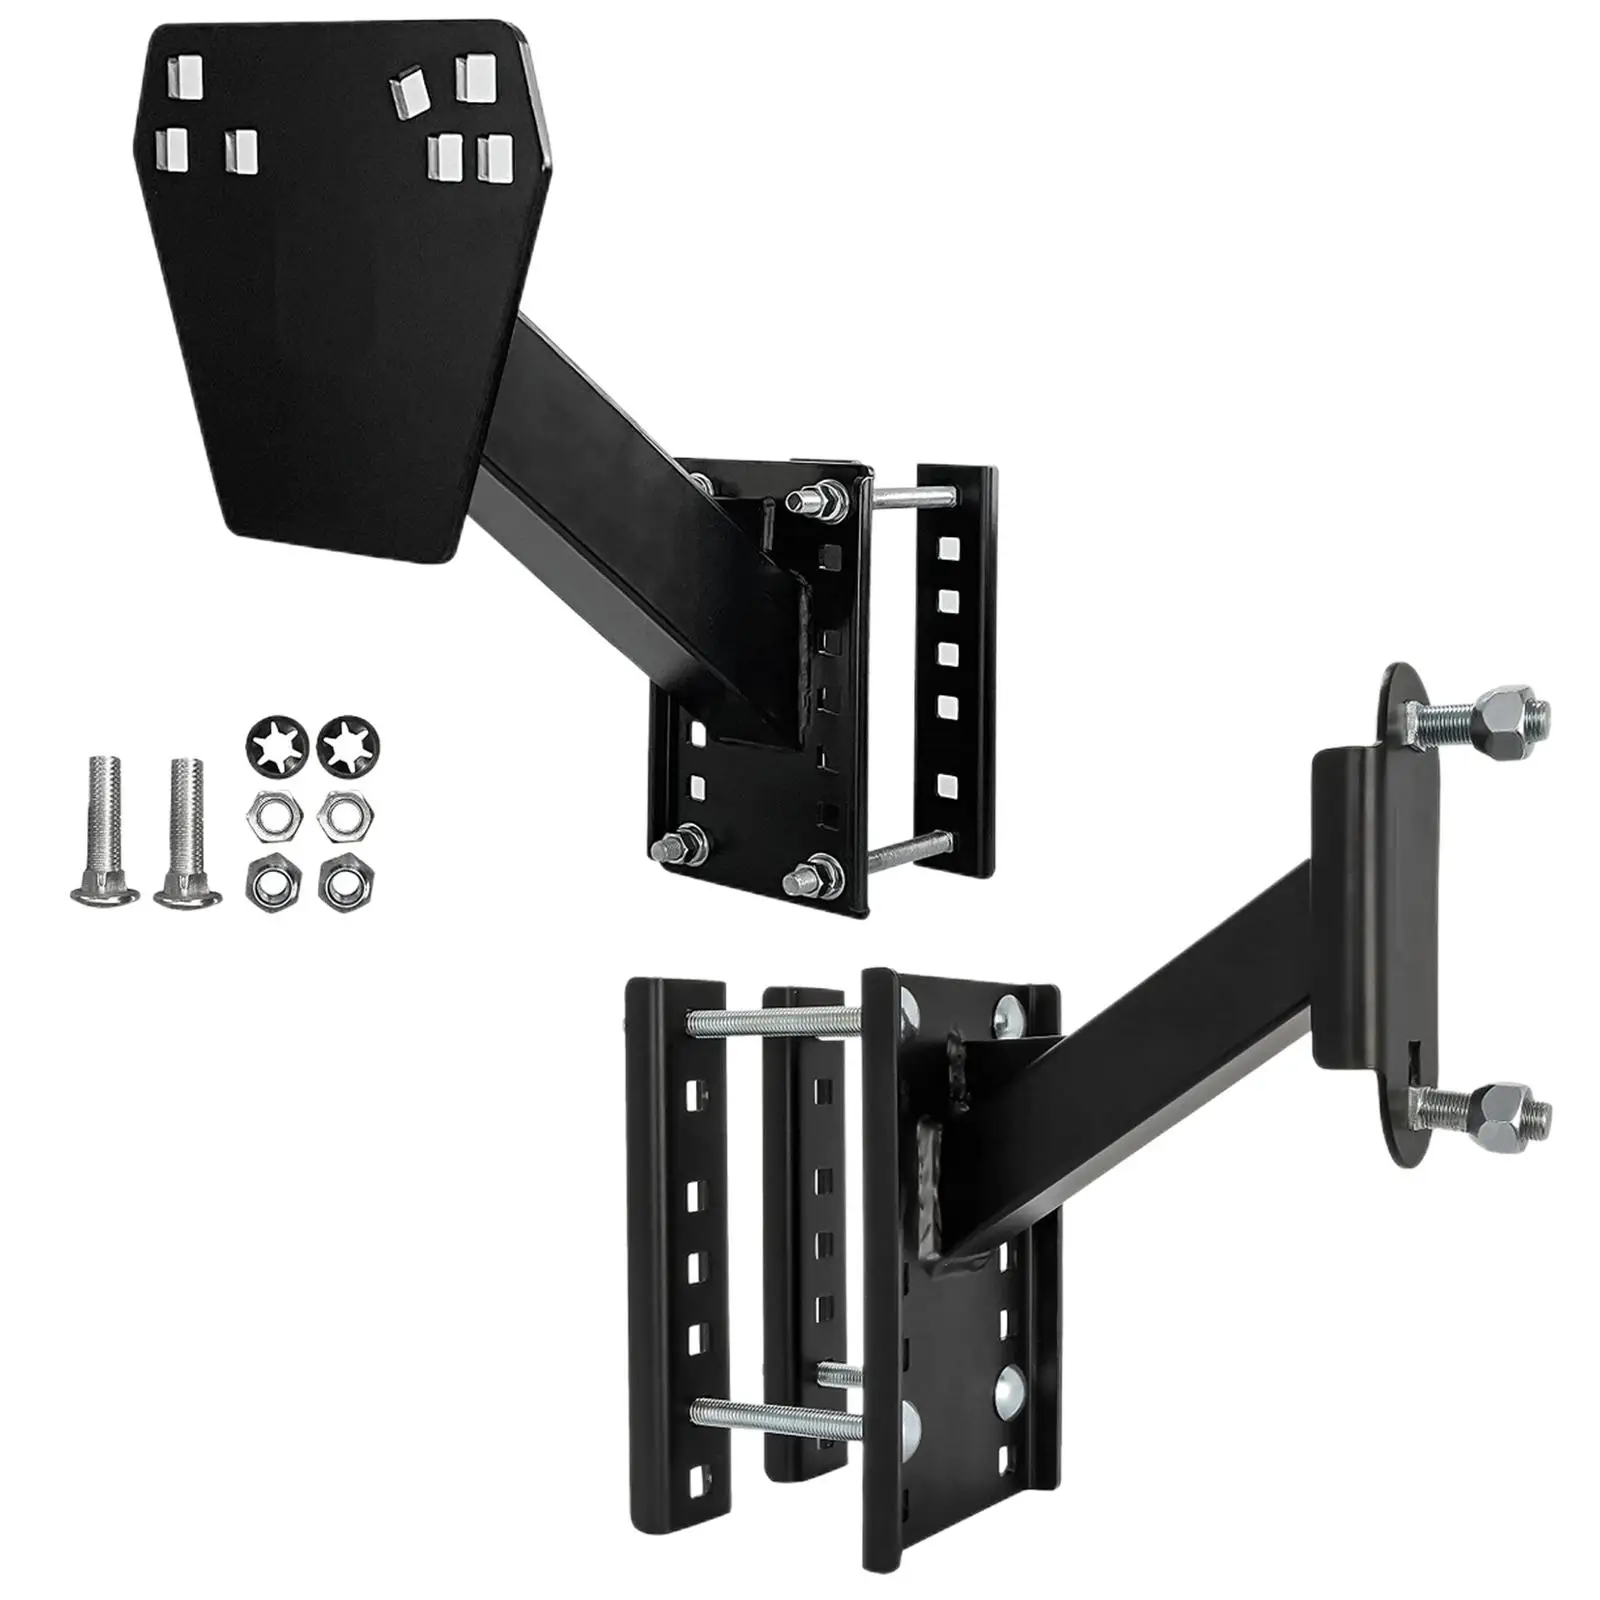 Trailer Spare Tire Carrier Wheel Holder, Bolt On W/ Screws Bracket Heavy Duty Mount Universal Support Black Fit for Trailers RV